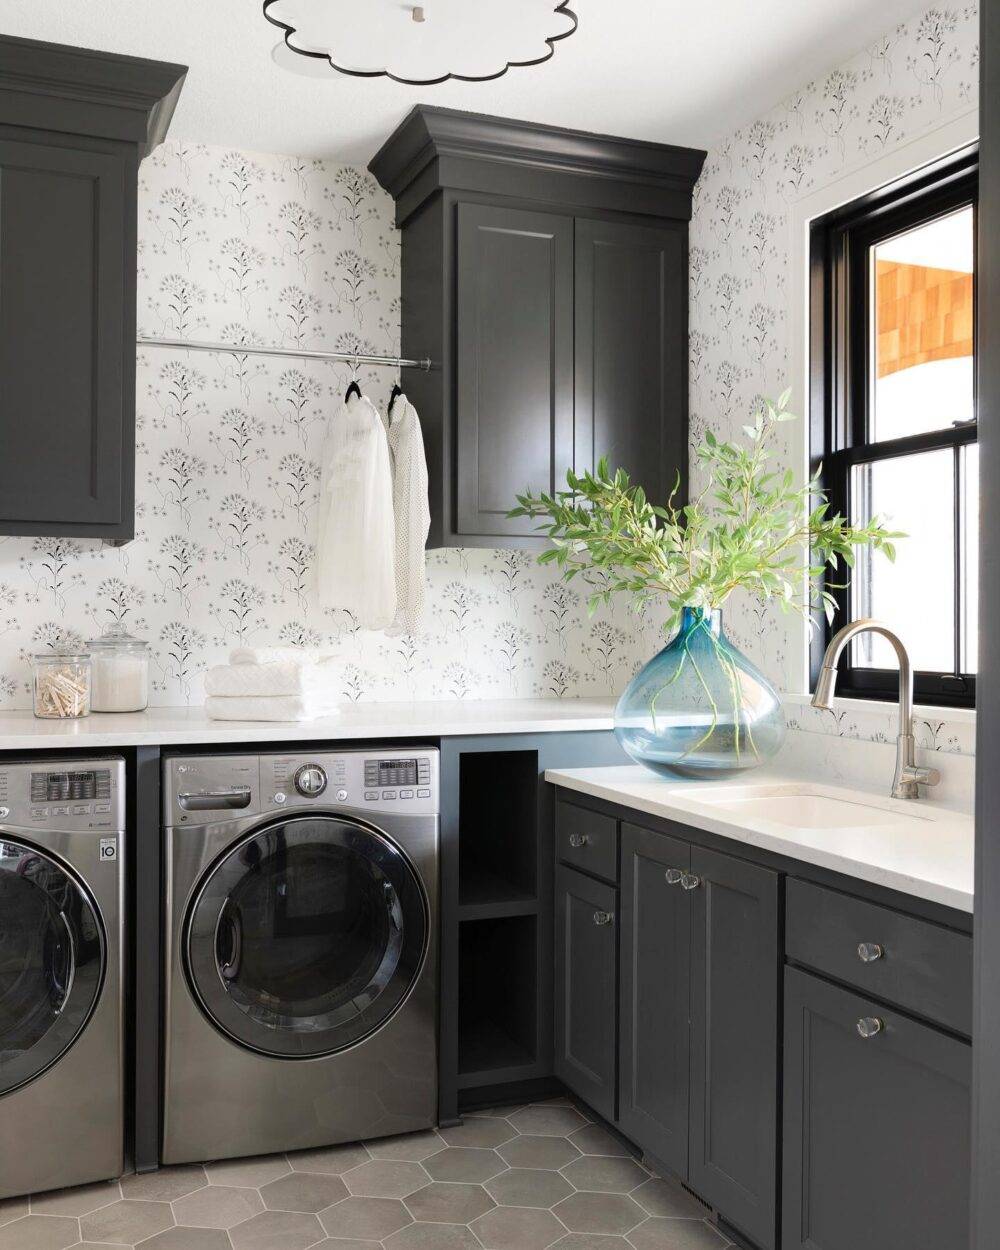 Laundry room with delicate grey and white floral wallpaper. Large blue vase with green-leaved twigs. Grey hexagon tile floor. 